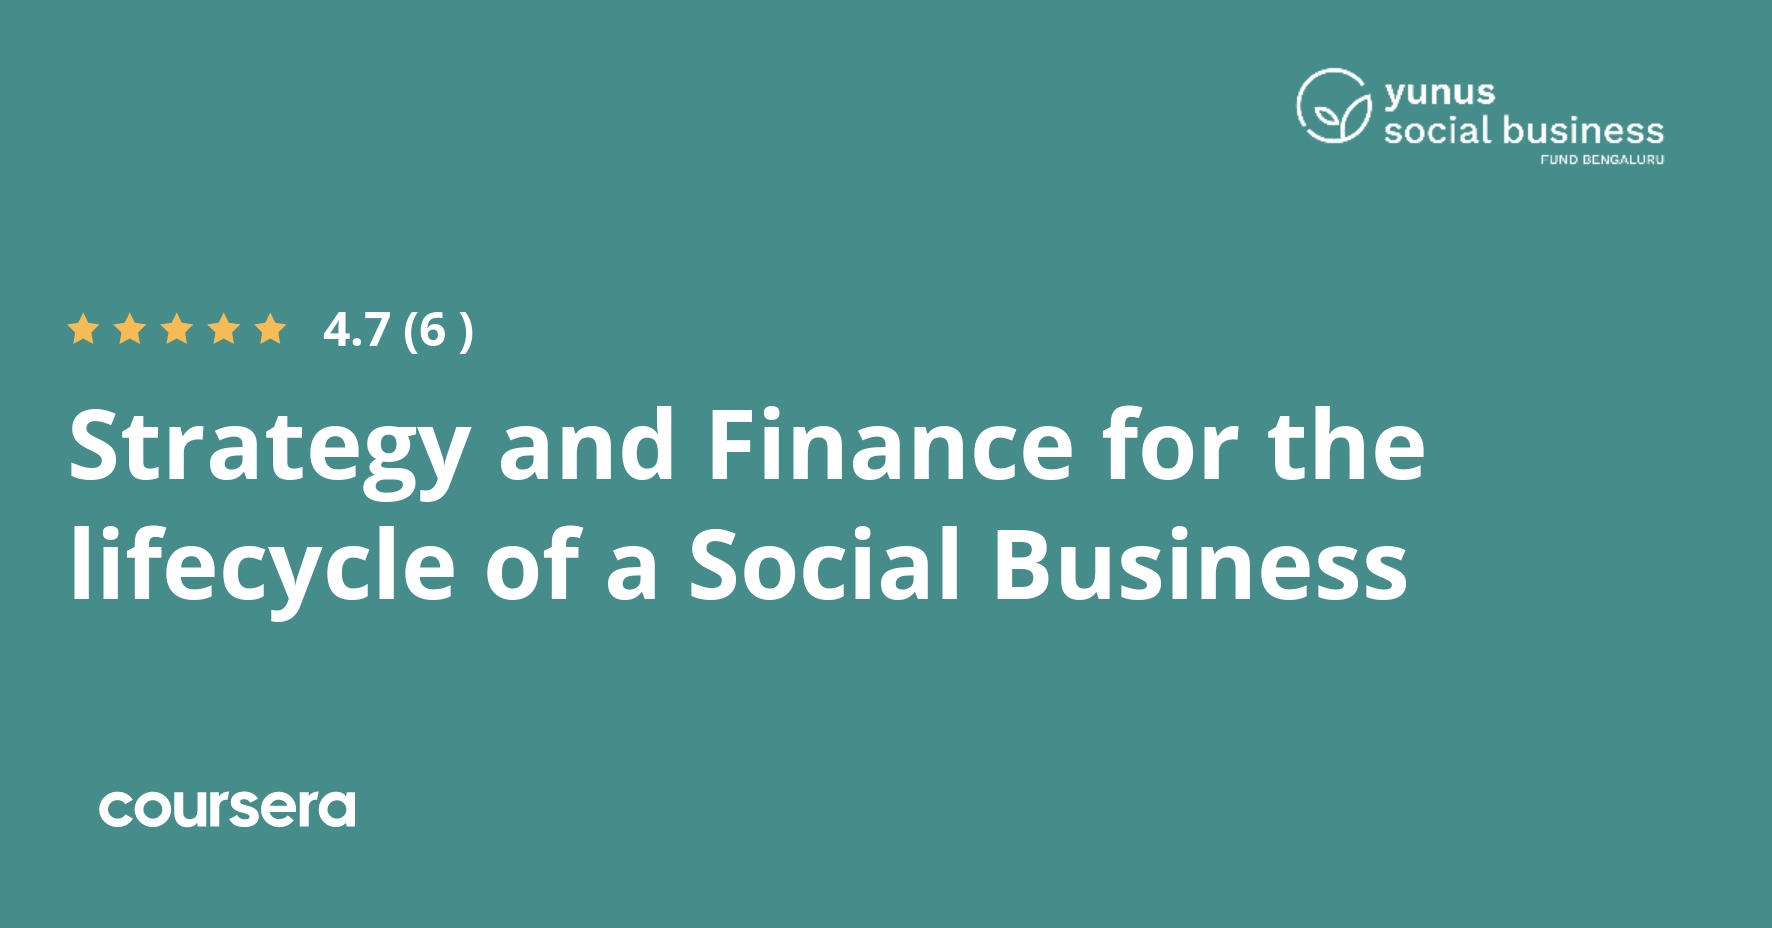 strategy-and-finance-for-the-lifecycle-of-a-social-business